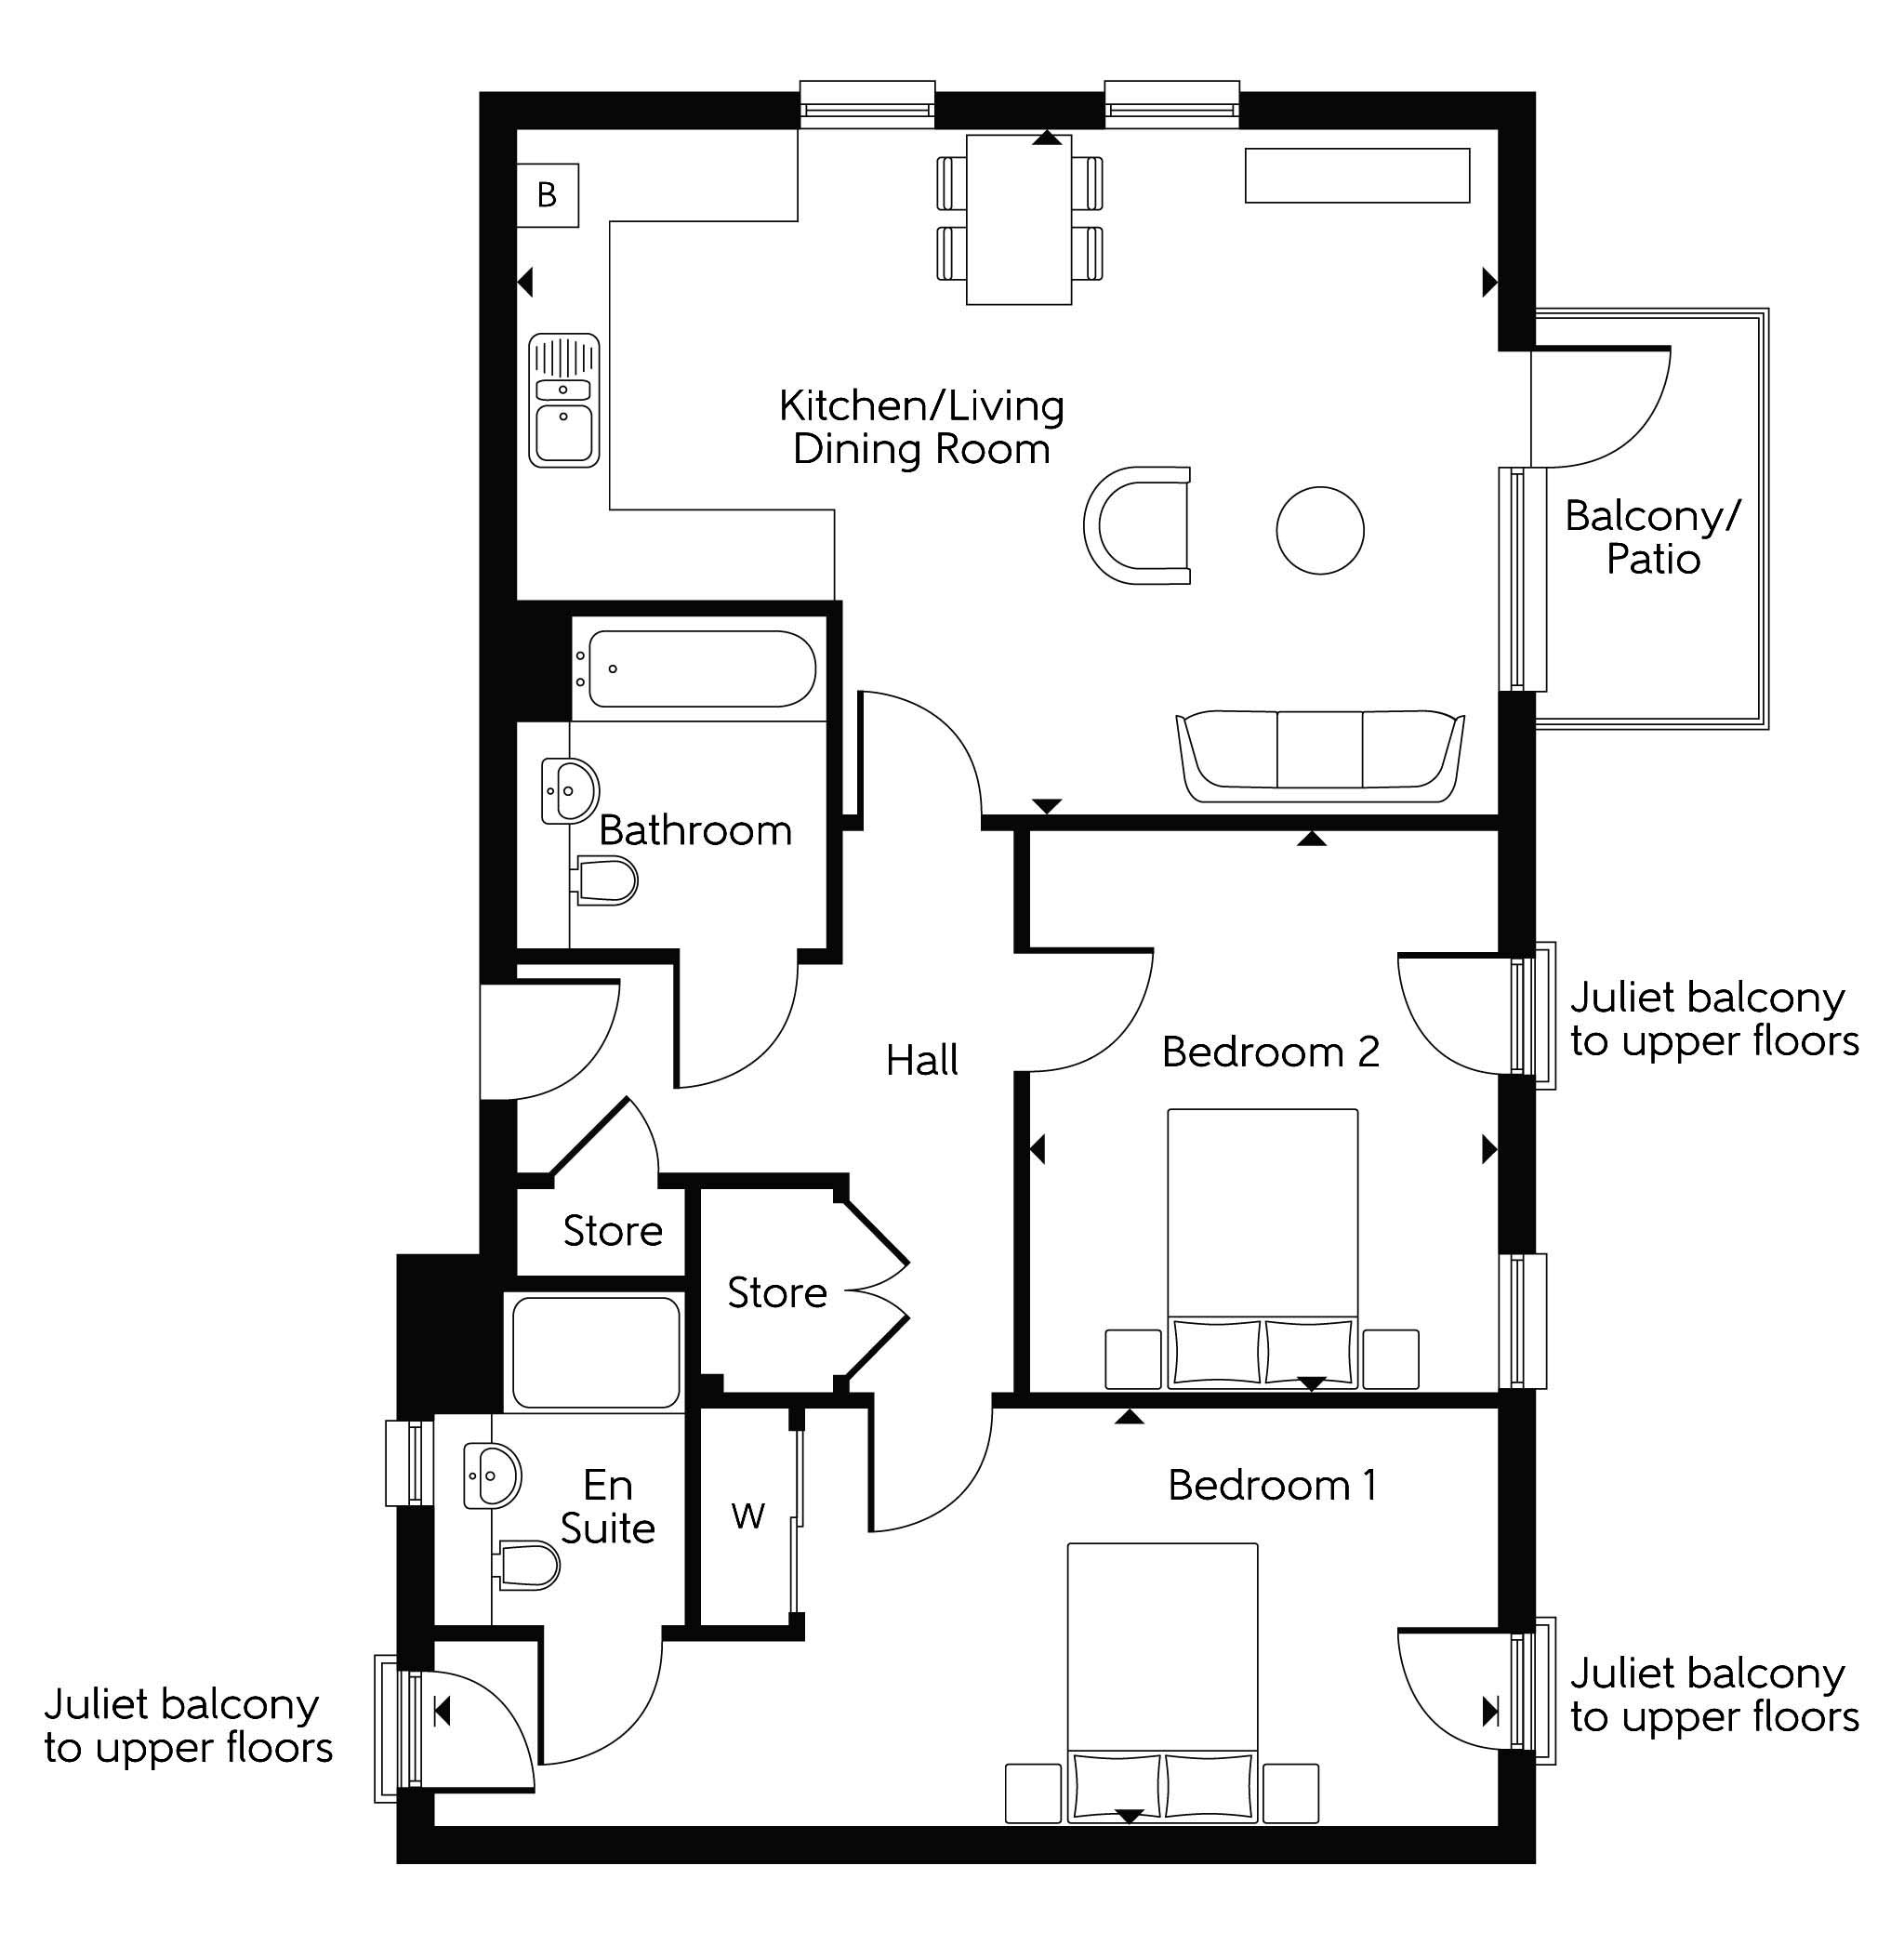 Apartment The Chartwell for From £272,995 with 2 bedrooms